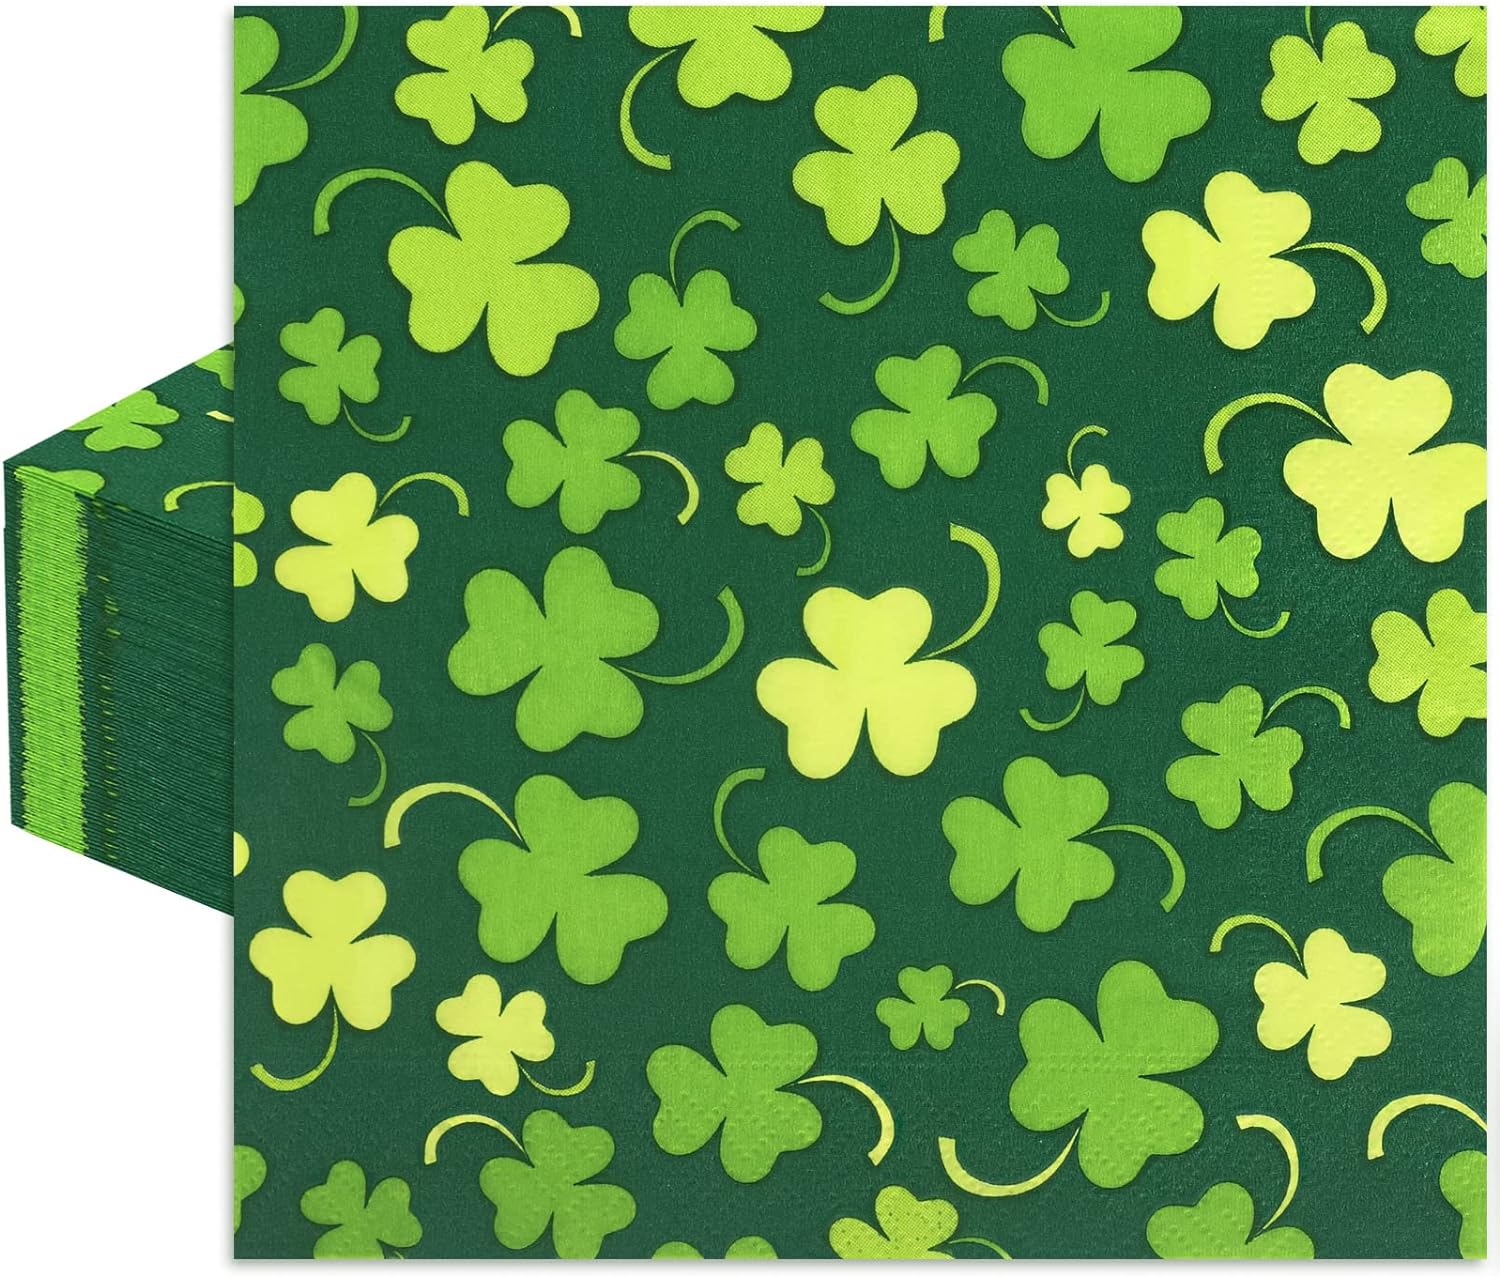 Whaline 80 Pack St. Patrick' Day Napkins 6.5 x 6.5 Inch Green Shamrock Dinner Napkins Lucky Clover Disposable Paper Napkins for Irish Holiday Table Decorations Party Supplies